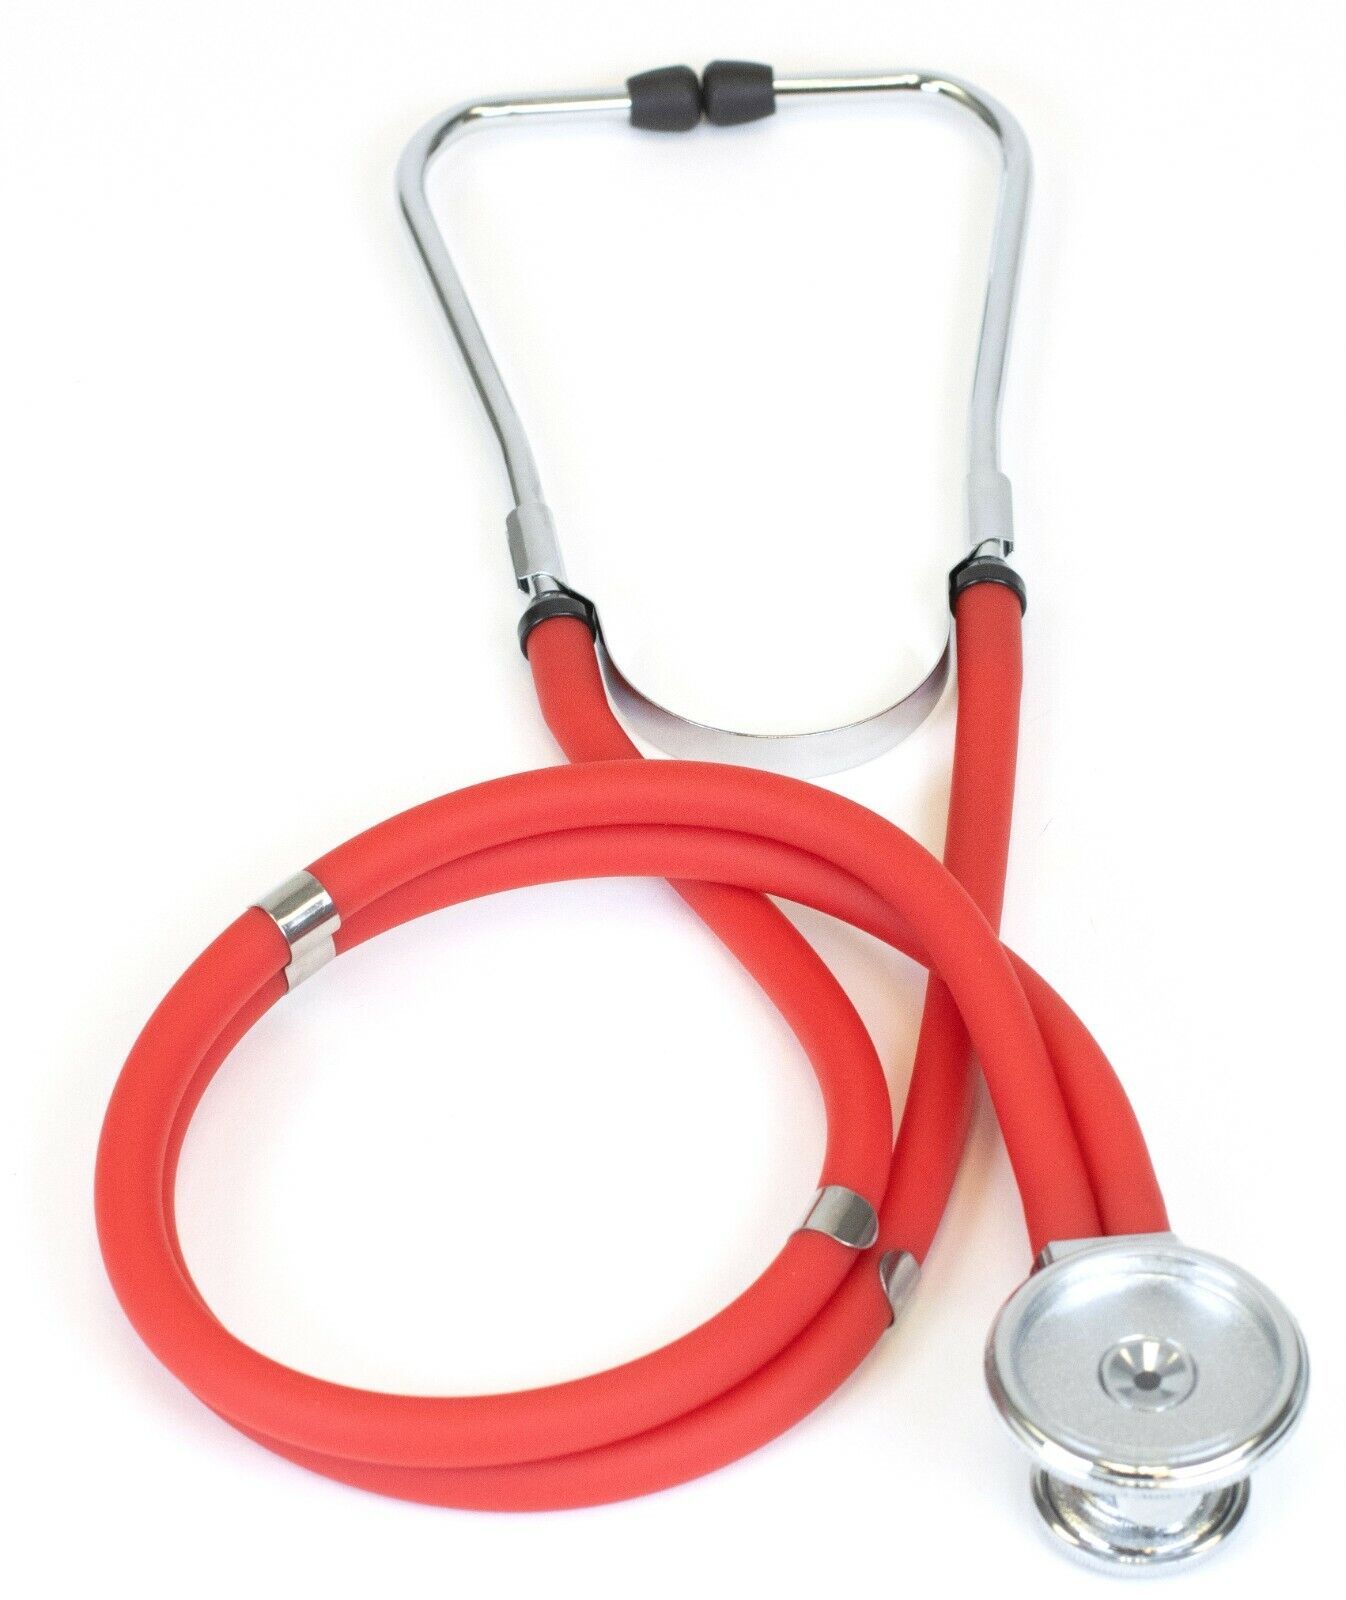 Primacare DS-9295-RD Sprague Rappaport Stethoscope, Red